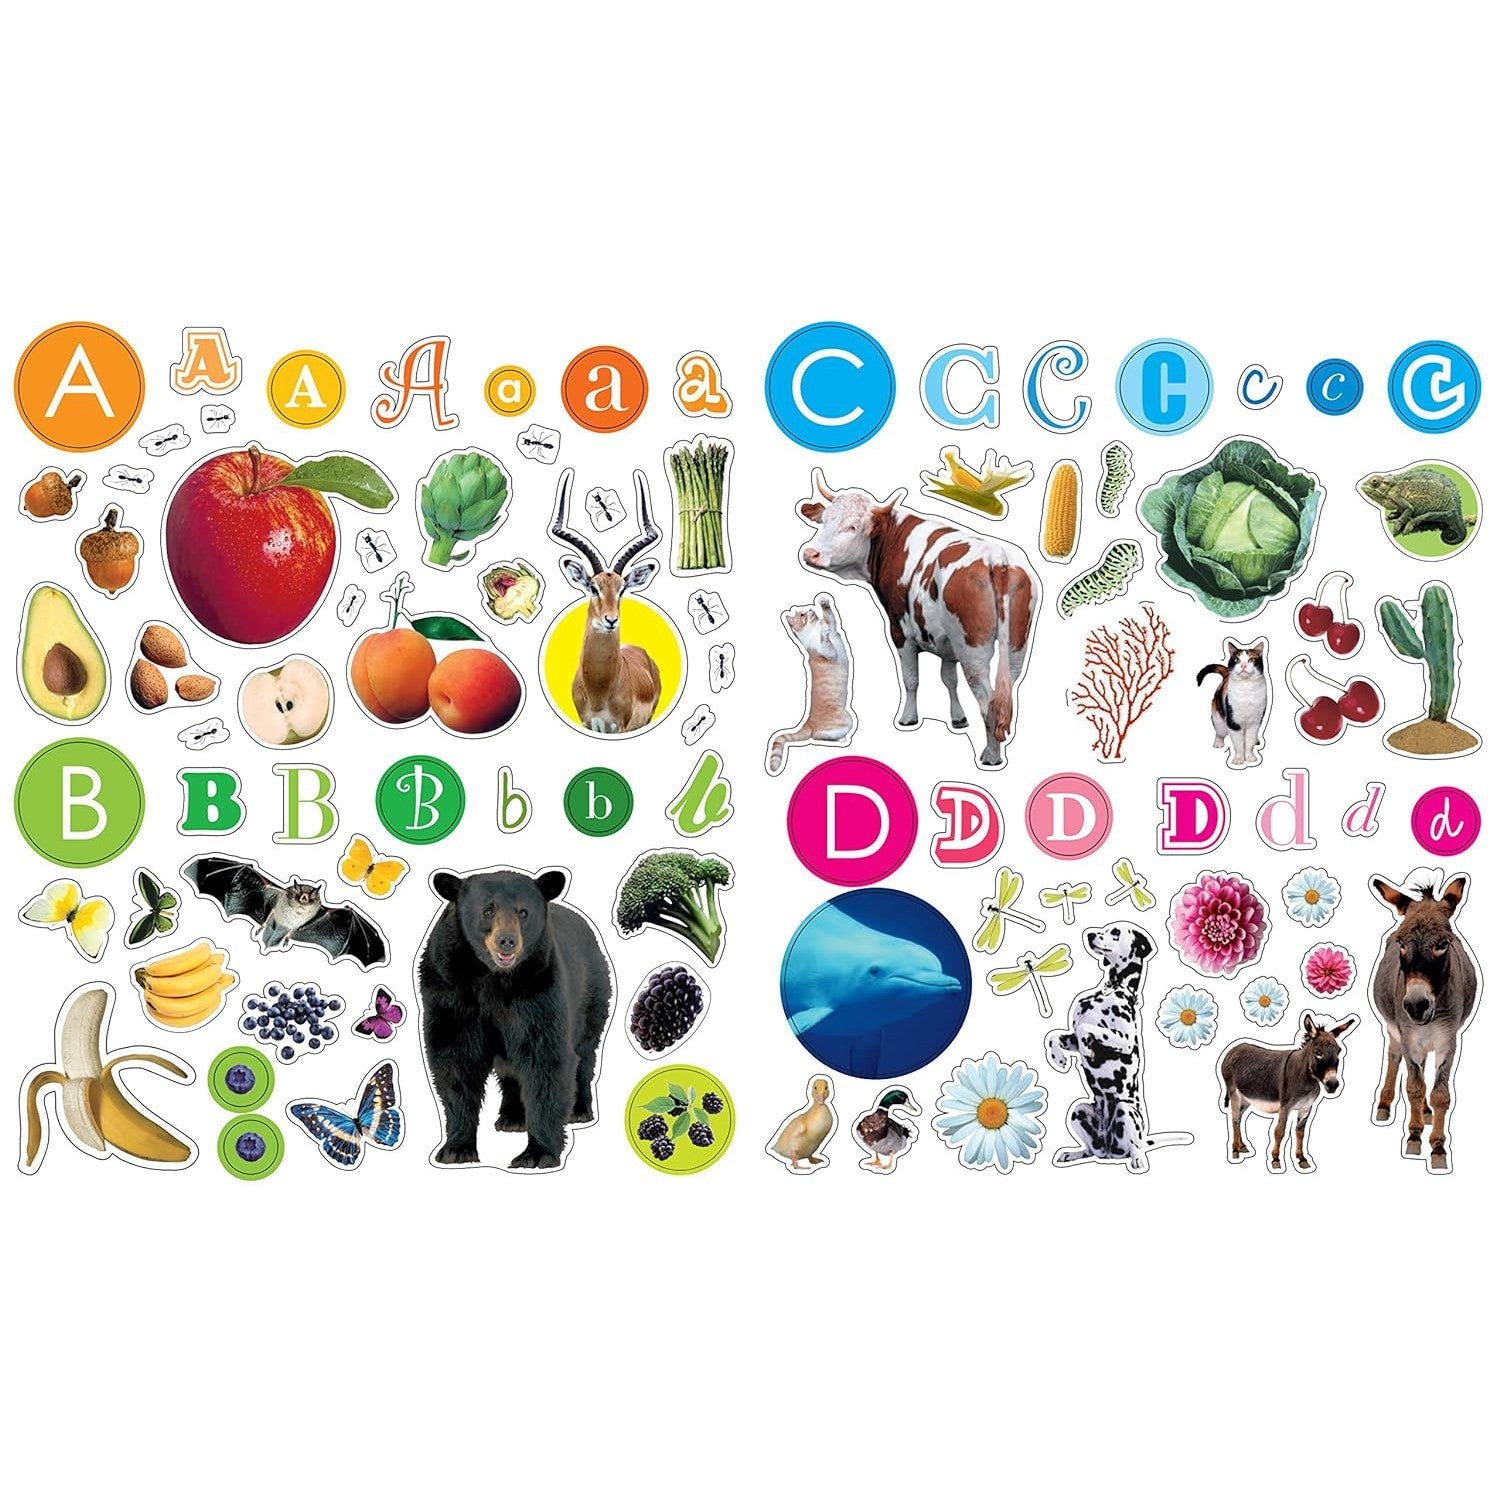 Eyelike Stickers: Letters (Paperback Book)-HACHETTE BOOK GROUP USA-Little Giant Kidz